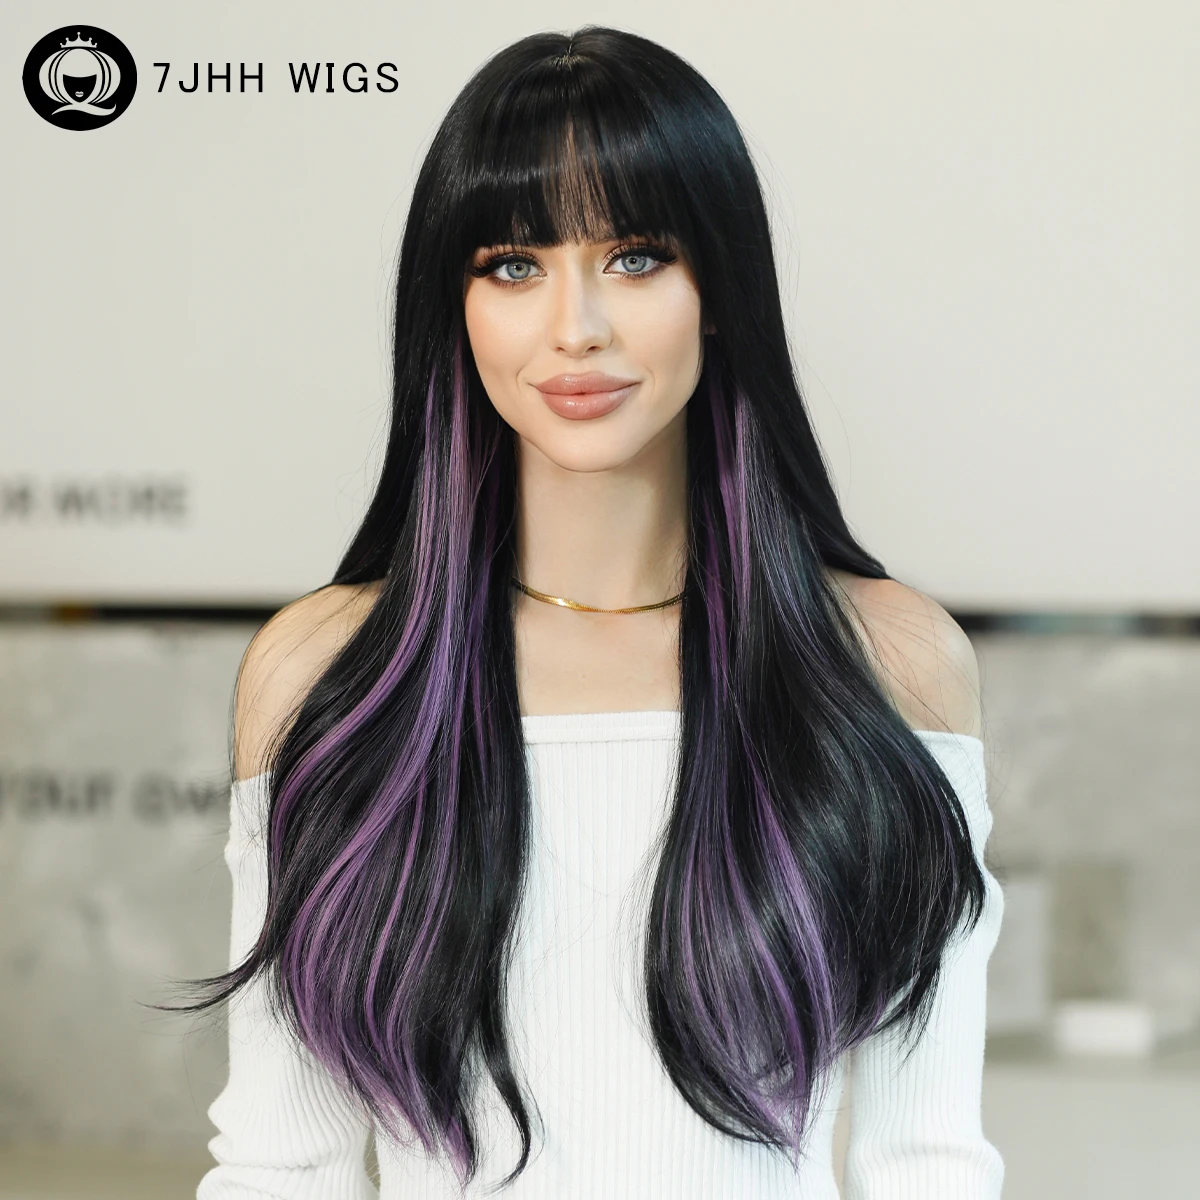 7JHH WIGS Long Wavy Dark Green Wig for Women Daily Cosplay Party Highlight Purple Synthetic Hair Wig with Bangs Heat Resistant